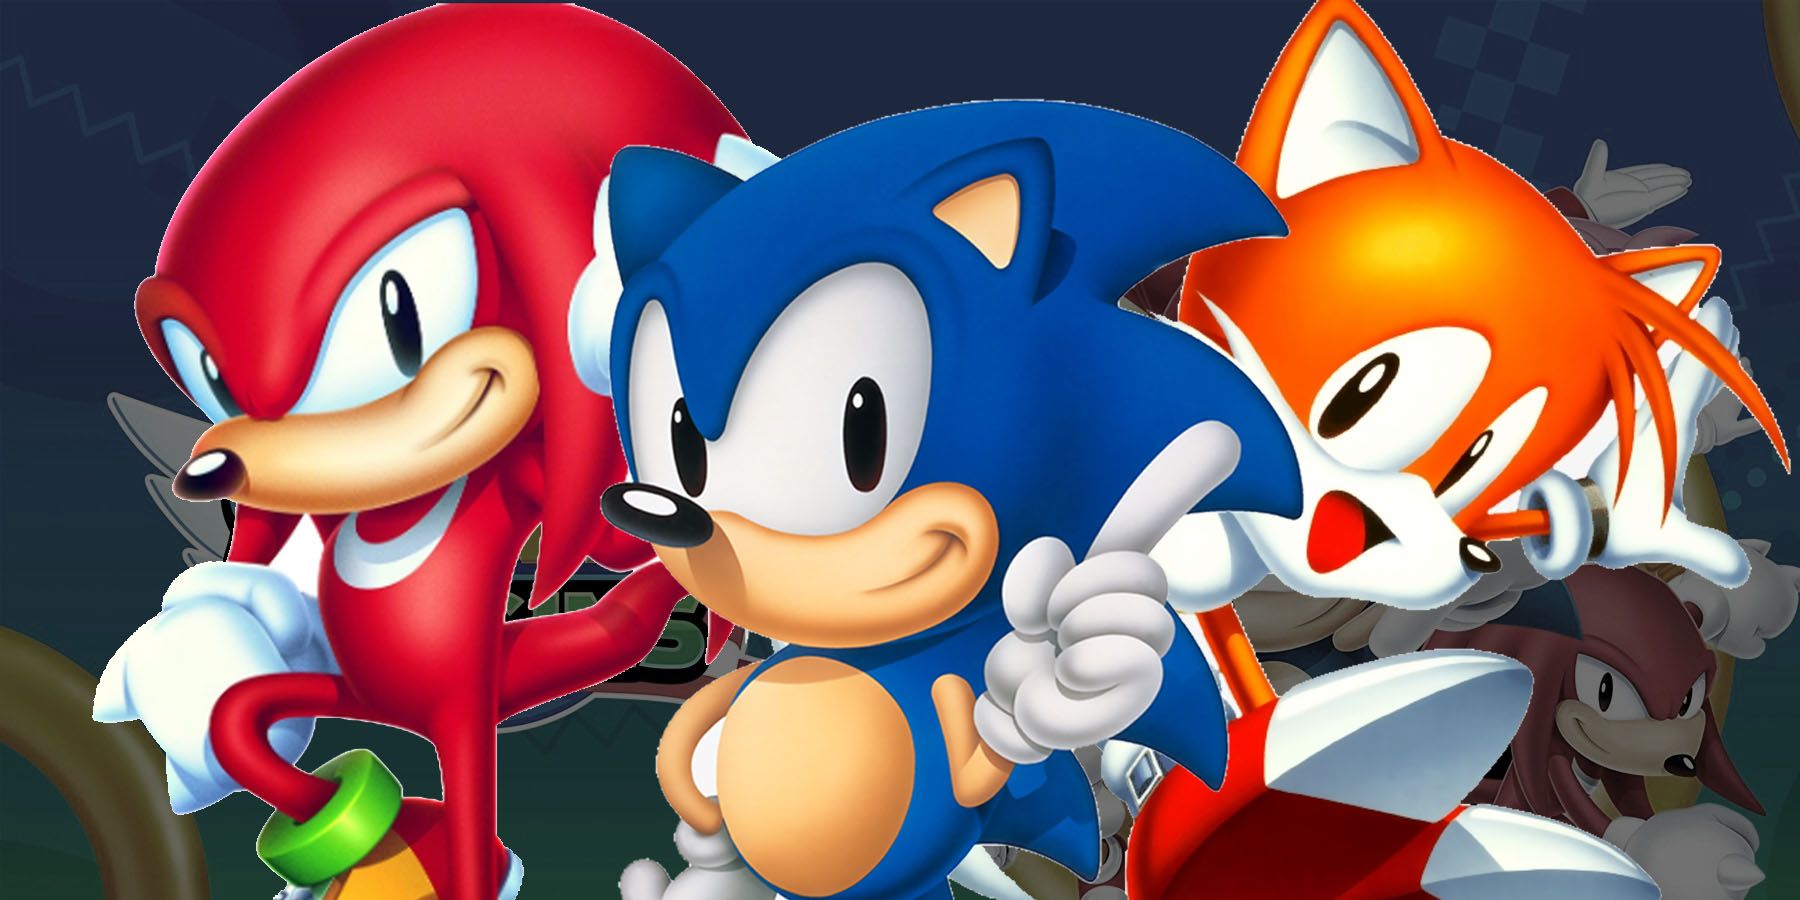 The best Sonic characters